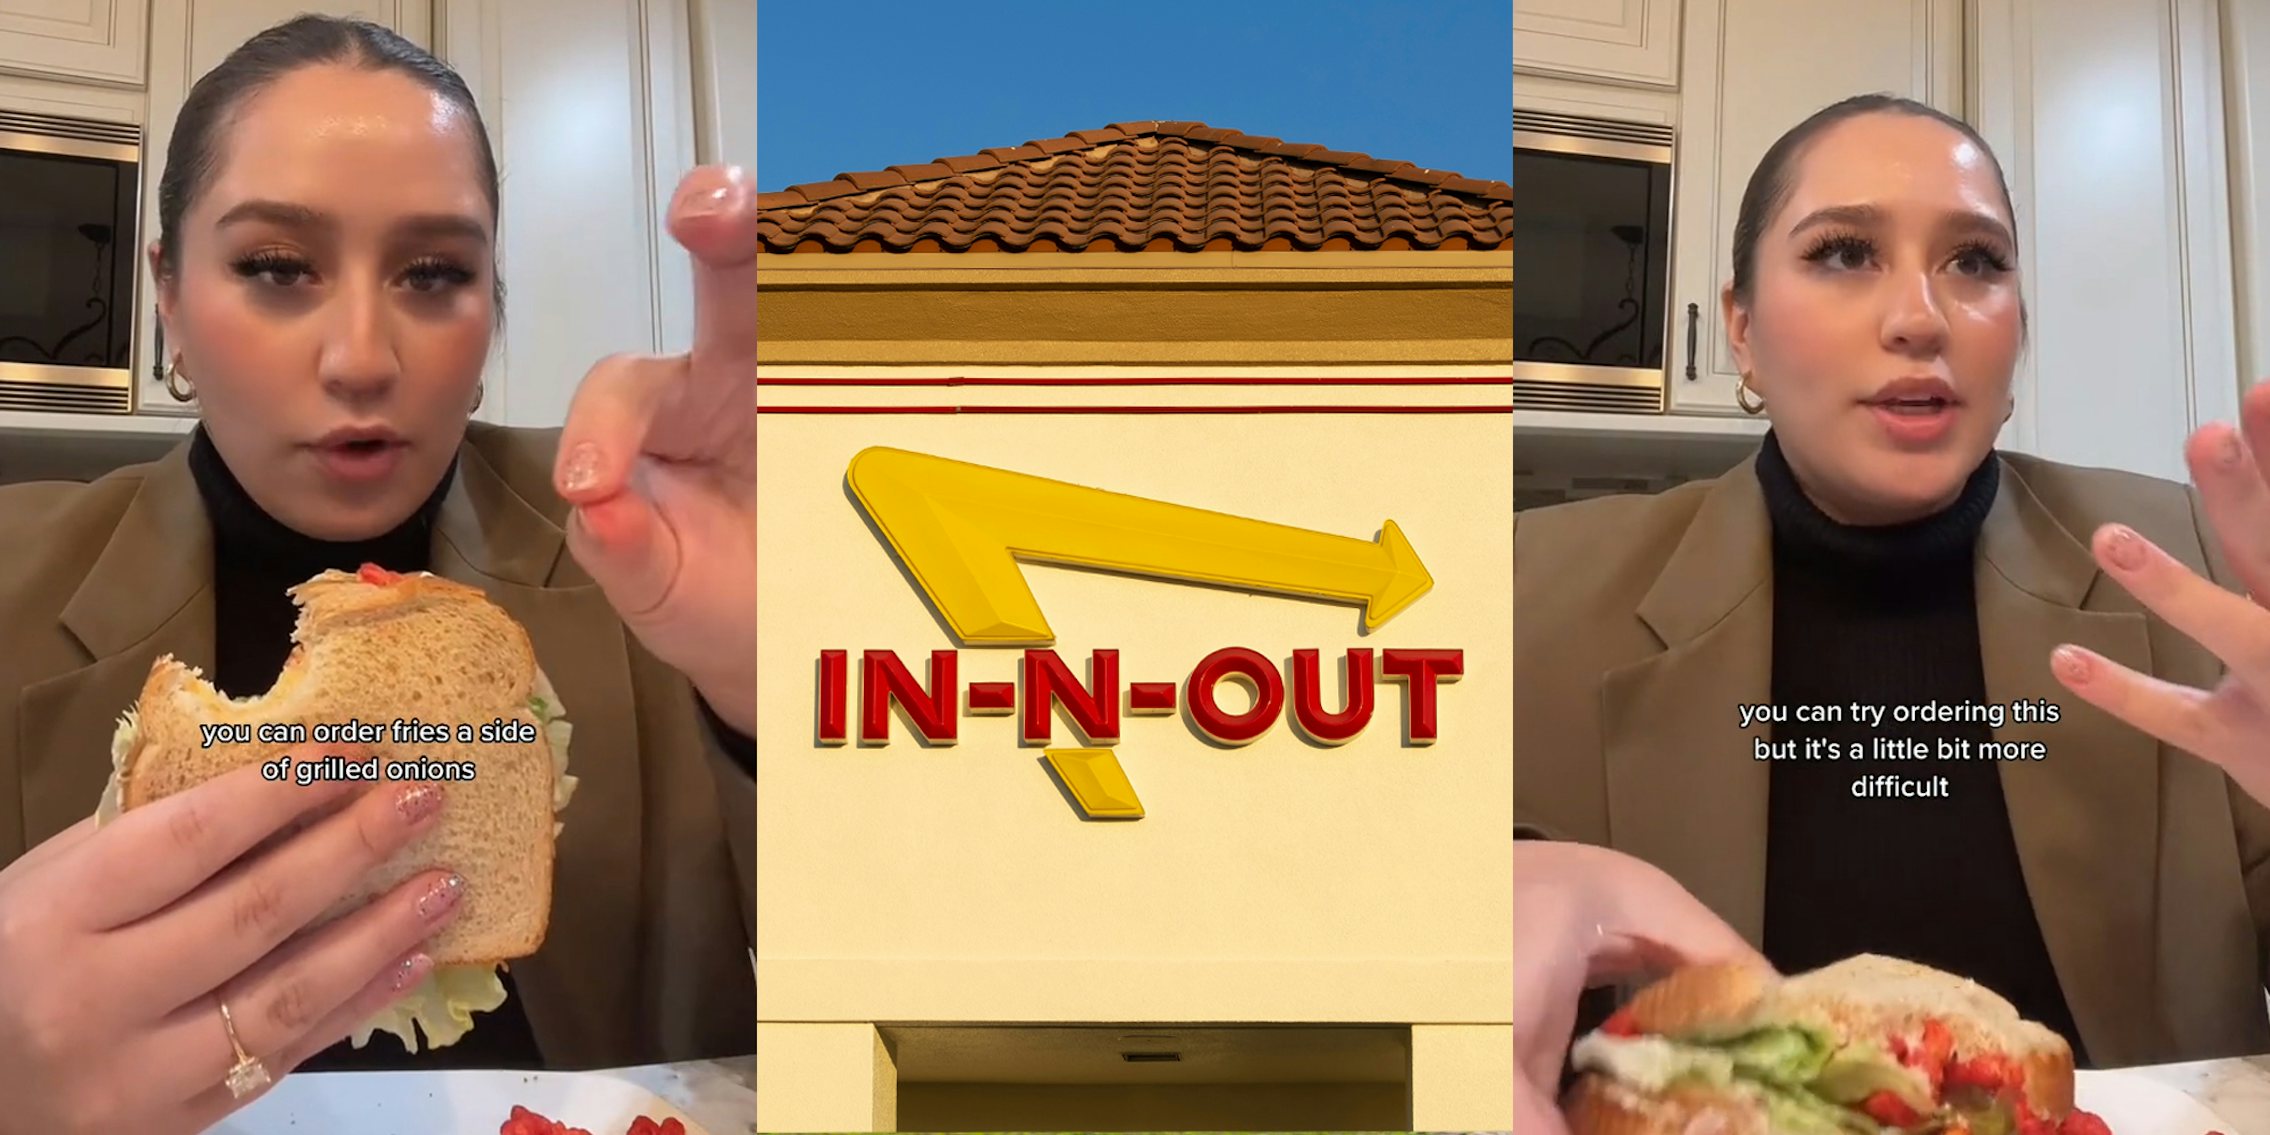 former IN-N-Out worker speaking while eating sandwich with caption 'you can order fries a side of grilled onions' (l) In-N-Out sign on building (c) former IN-N-Out worker speaking while eating sandwich with caption 'you can try ordering this but it's a little bit more difficult' (r)